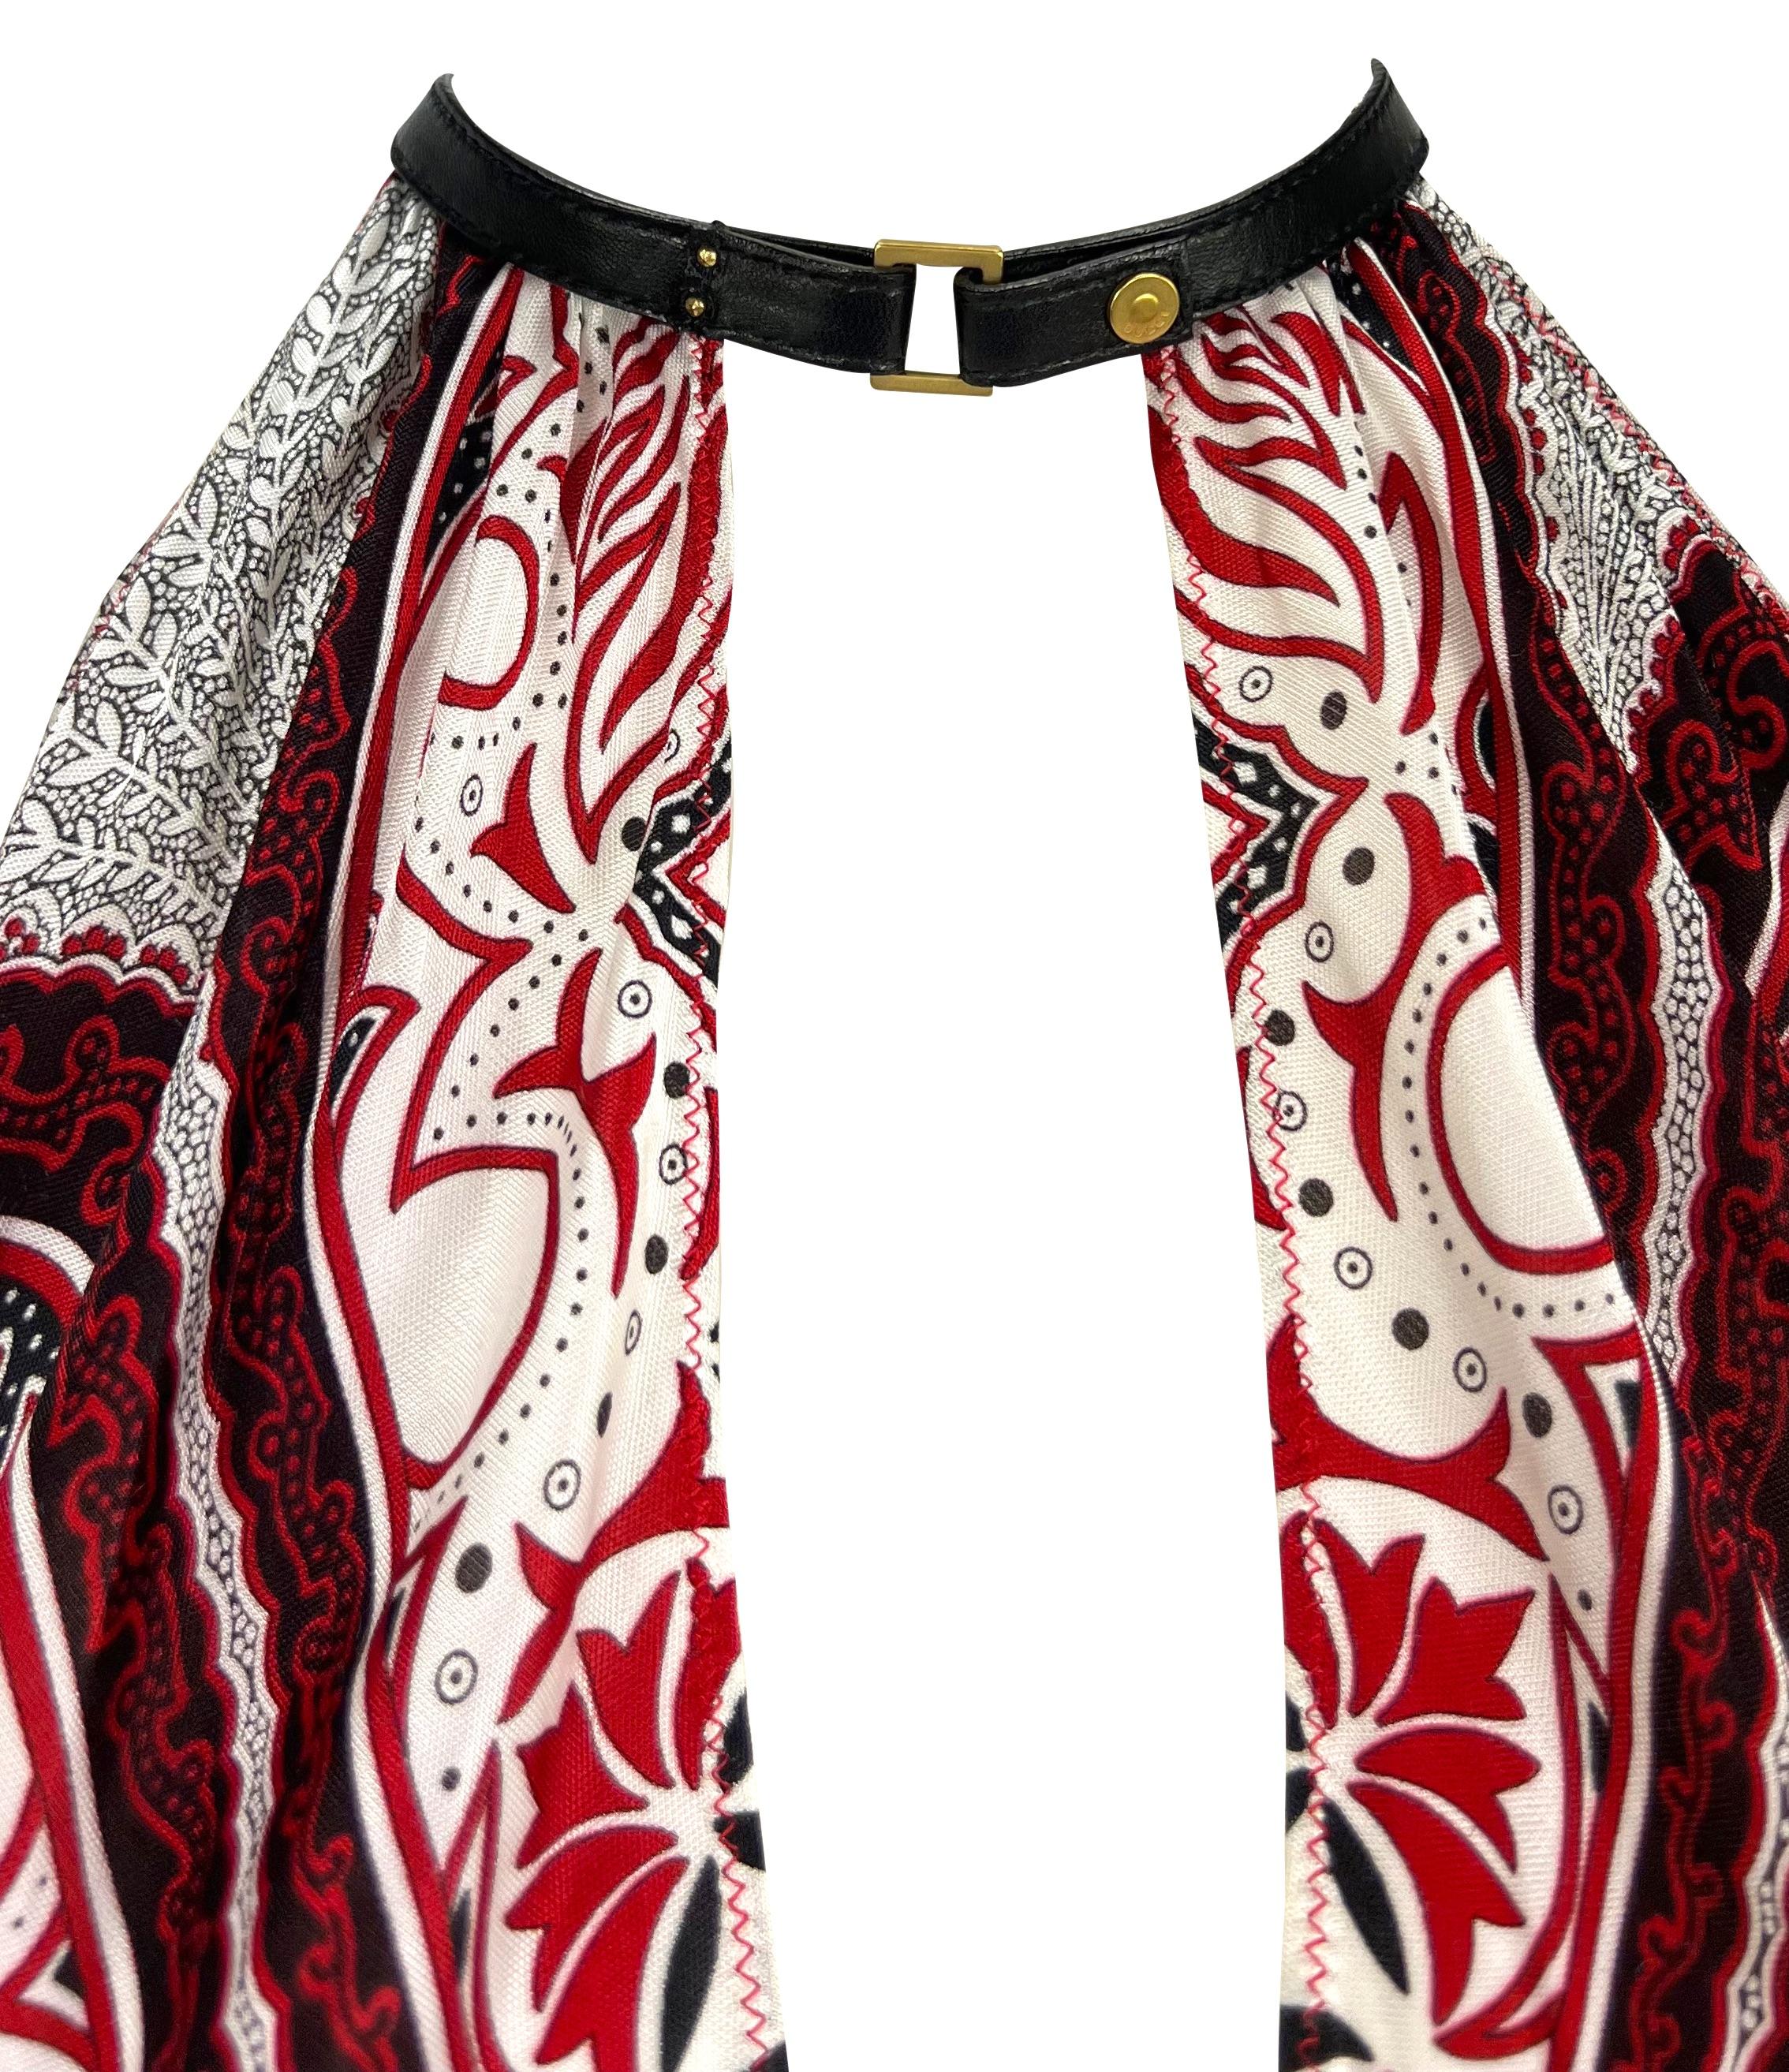 Presenting a fabulous red paisley bandana print Gucci halterneck scarf top, designed by Tom Ford. From the 2004 Cruise collection, this top features a plunging neckline, a brown leather halterneck, and is made complete with an exposed tie back.